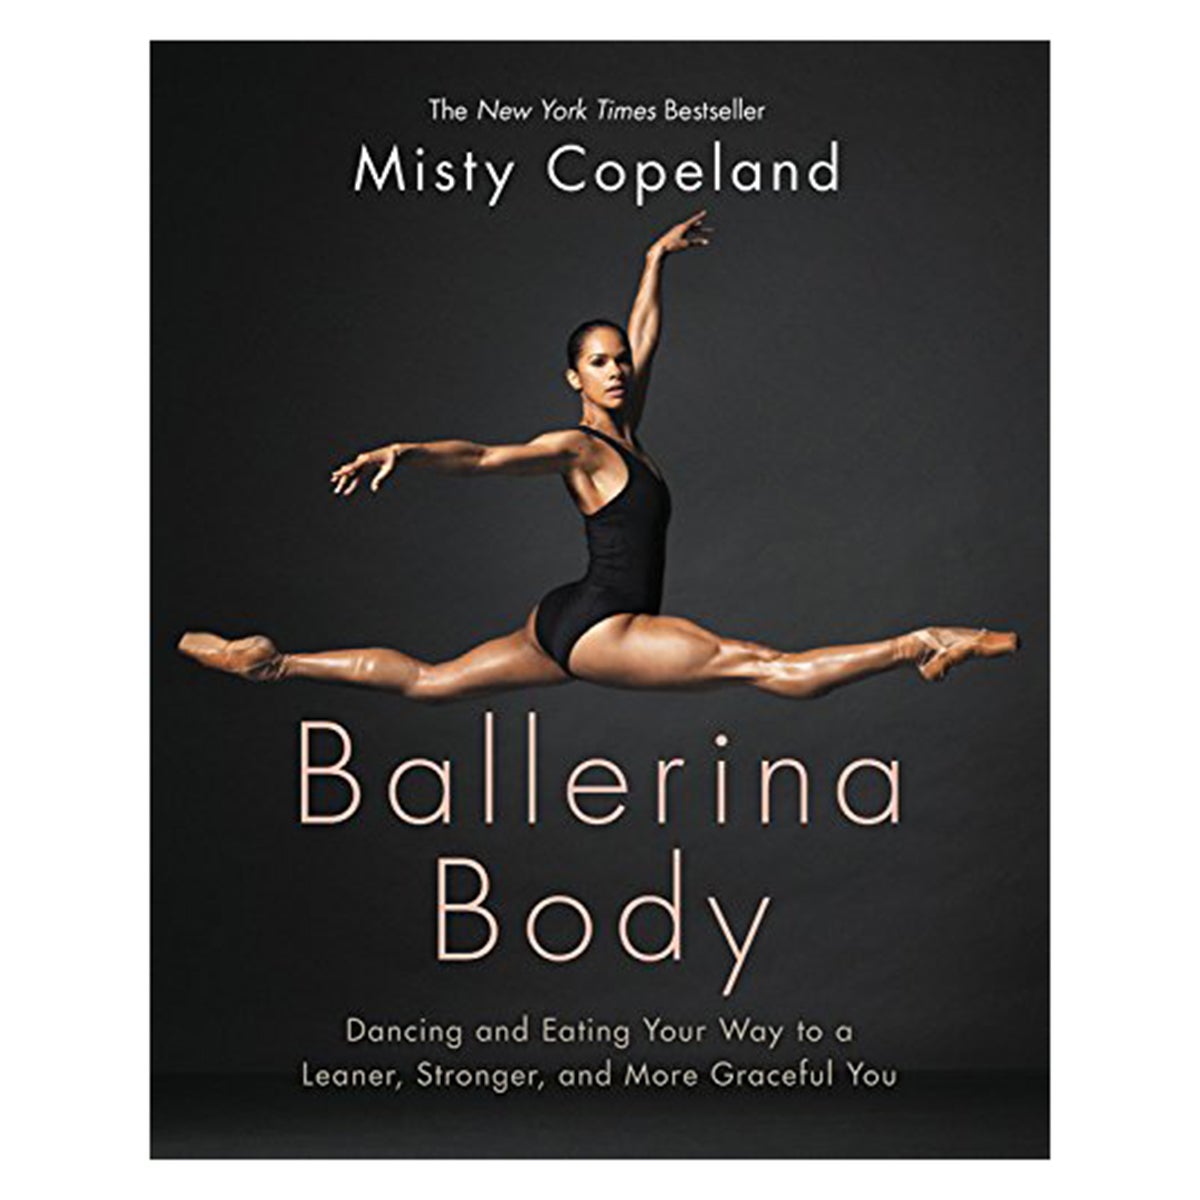 Misty Copeland Ballerina Body: Dancing and Eating Your Way to a Leaner, Stronger, and More Graceful You